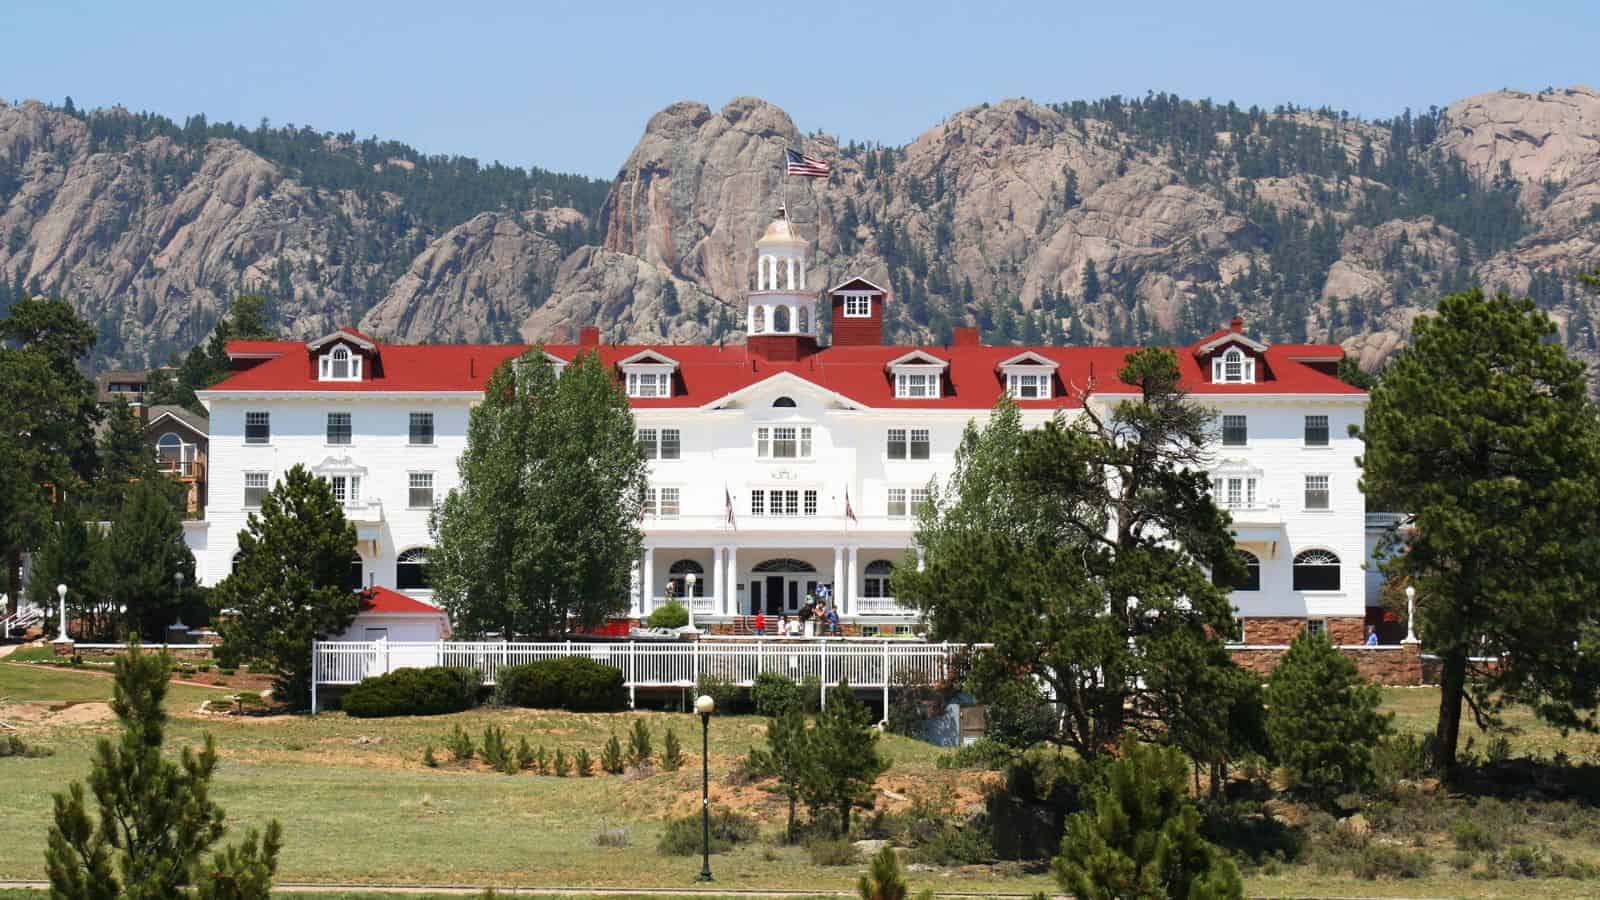 <p><span>Welcome to The Stanley Hotel, Colorado, where ‘The Shining’ is more than just a movie—it’s a guest experience. </span></p><p><span>The supernatural elements in The Shining draw from an </span><a href="https://www.flannelsorflipflops.com/19-of-the-most-dangerous-small-towns-in-america/"><span>actual haunting in Colorado</span></a><span>, infusing the story with authenticity. The haunted Stanley Hotel inspired the eerie Overlook Hotel, fueling Stephen King’s imagination for the novel.</span></p>